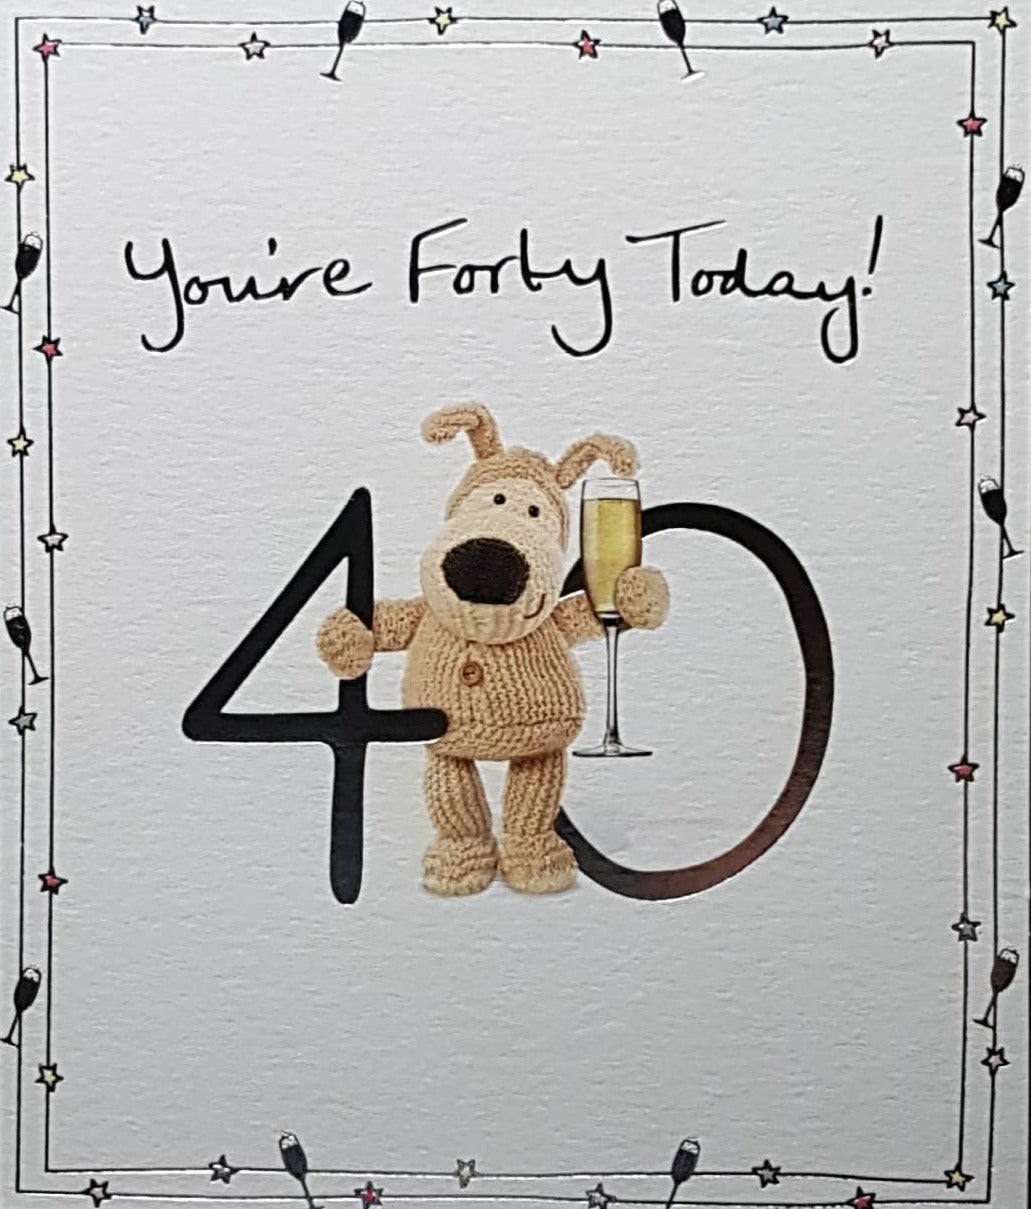 Age 40 Birthday Card - Cute Dog Teddy Holding A Glass Of Champagne